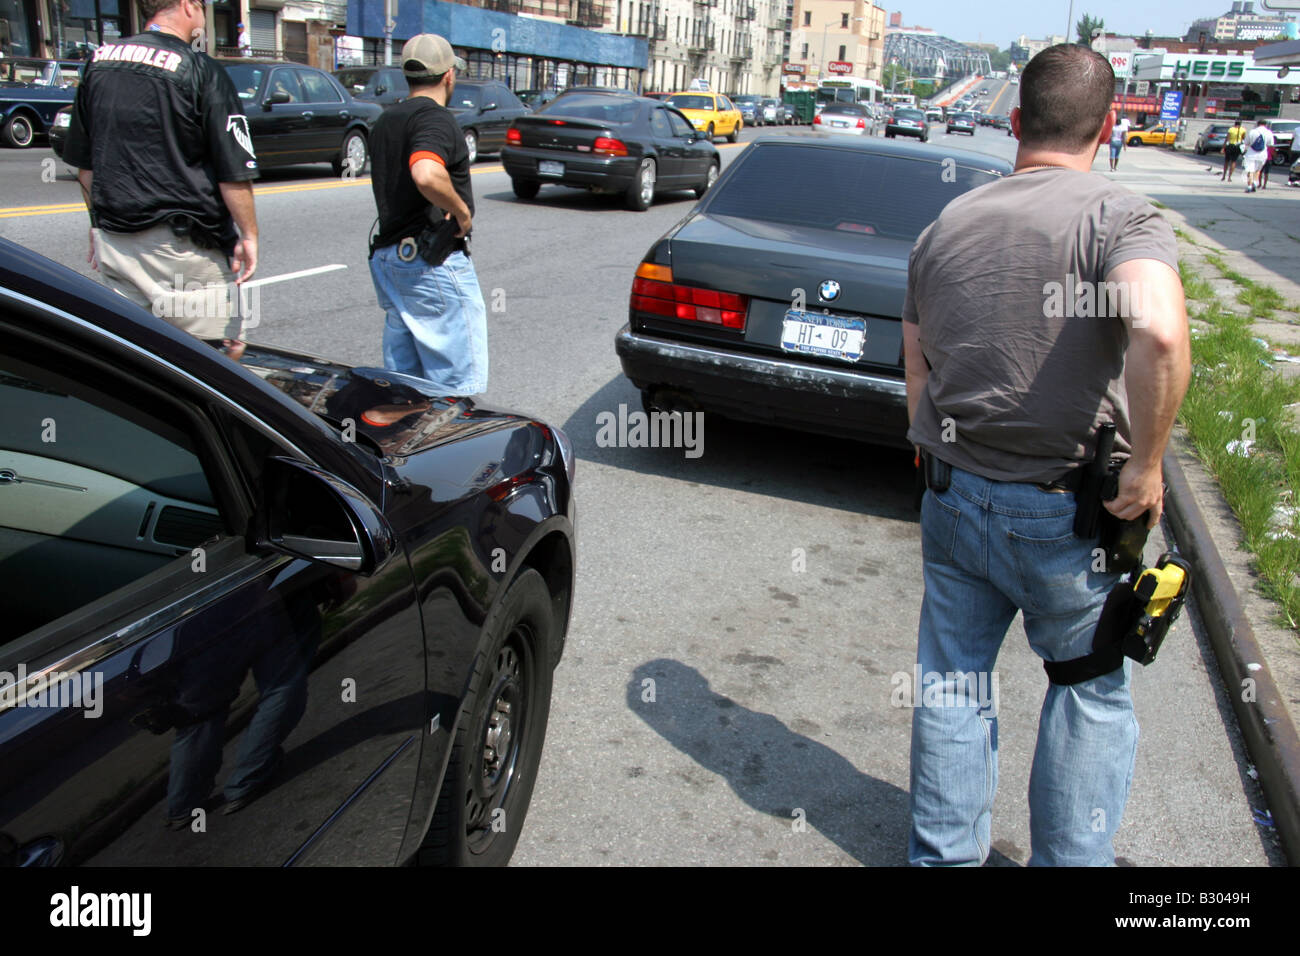 Plainclothes anti-crime police officers in New York City approach a suspect car in Harlem Stock Photo